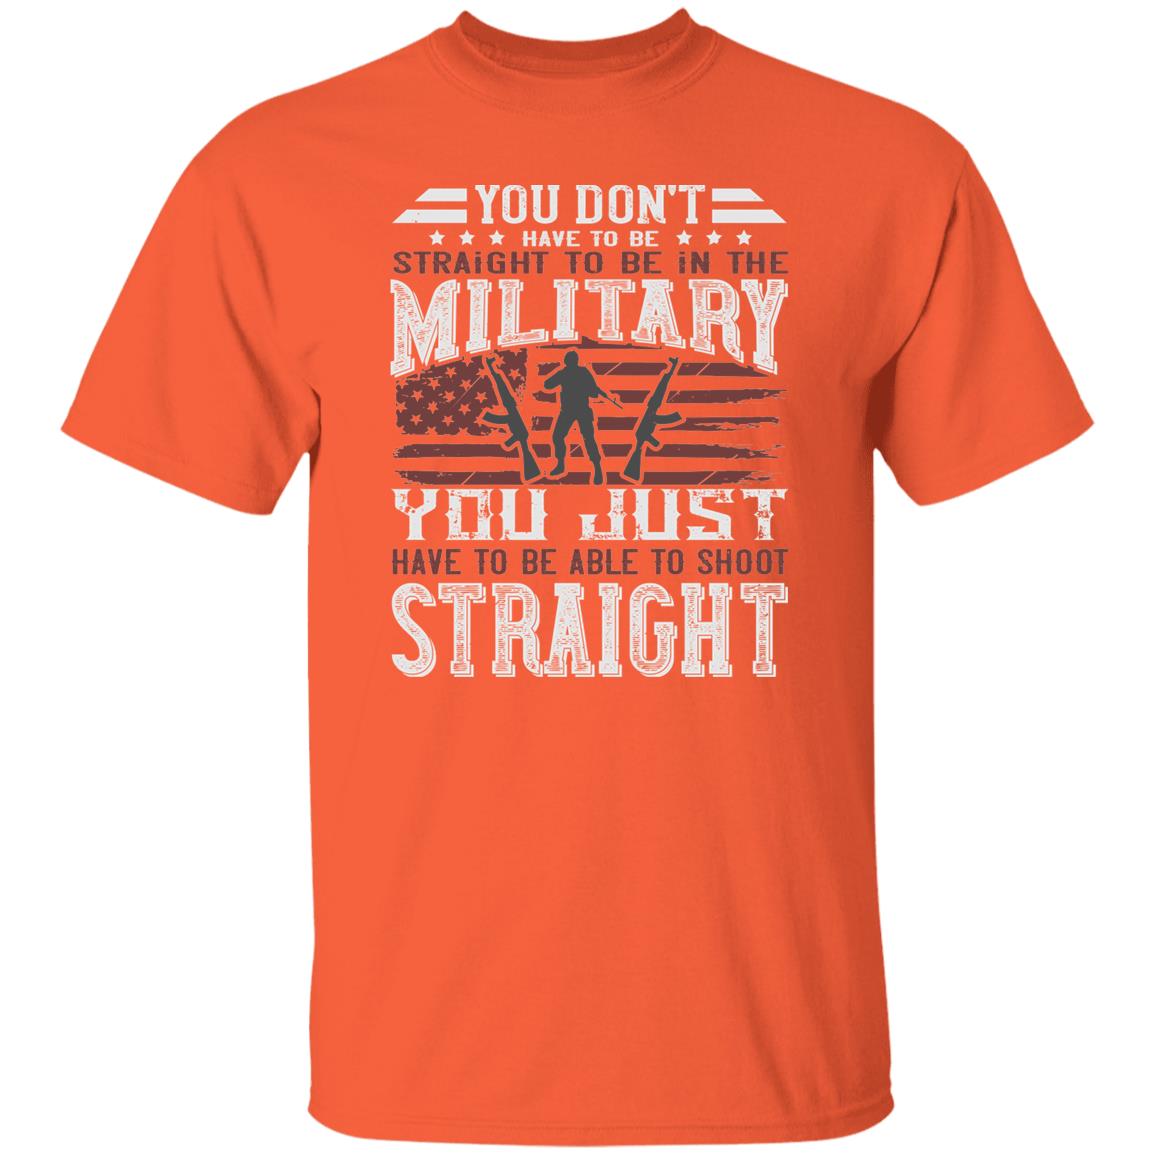 You Don't Have To Be Straight to Be in the Military t-shirt